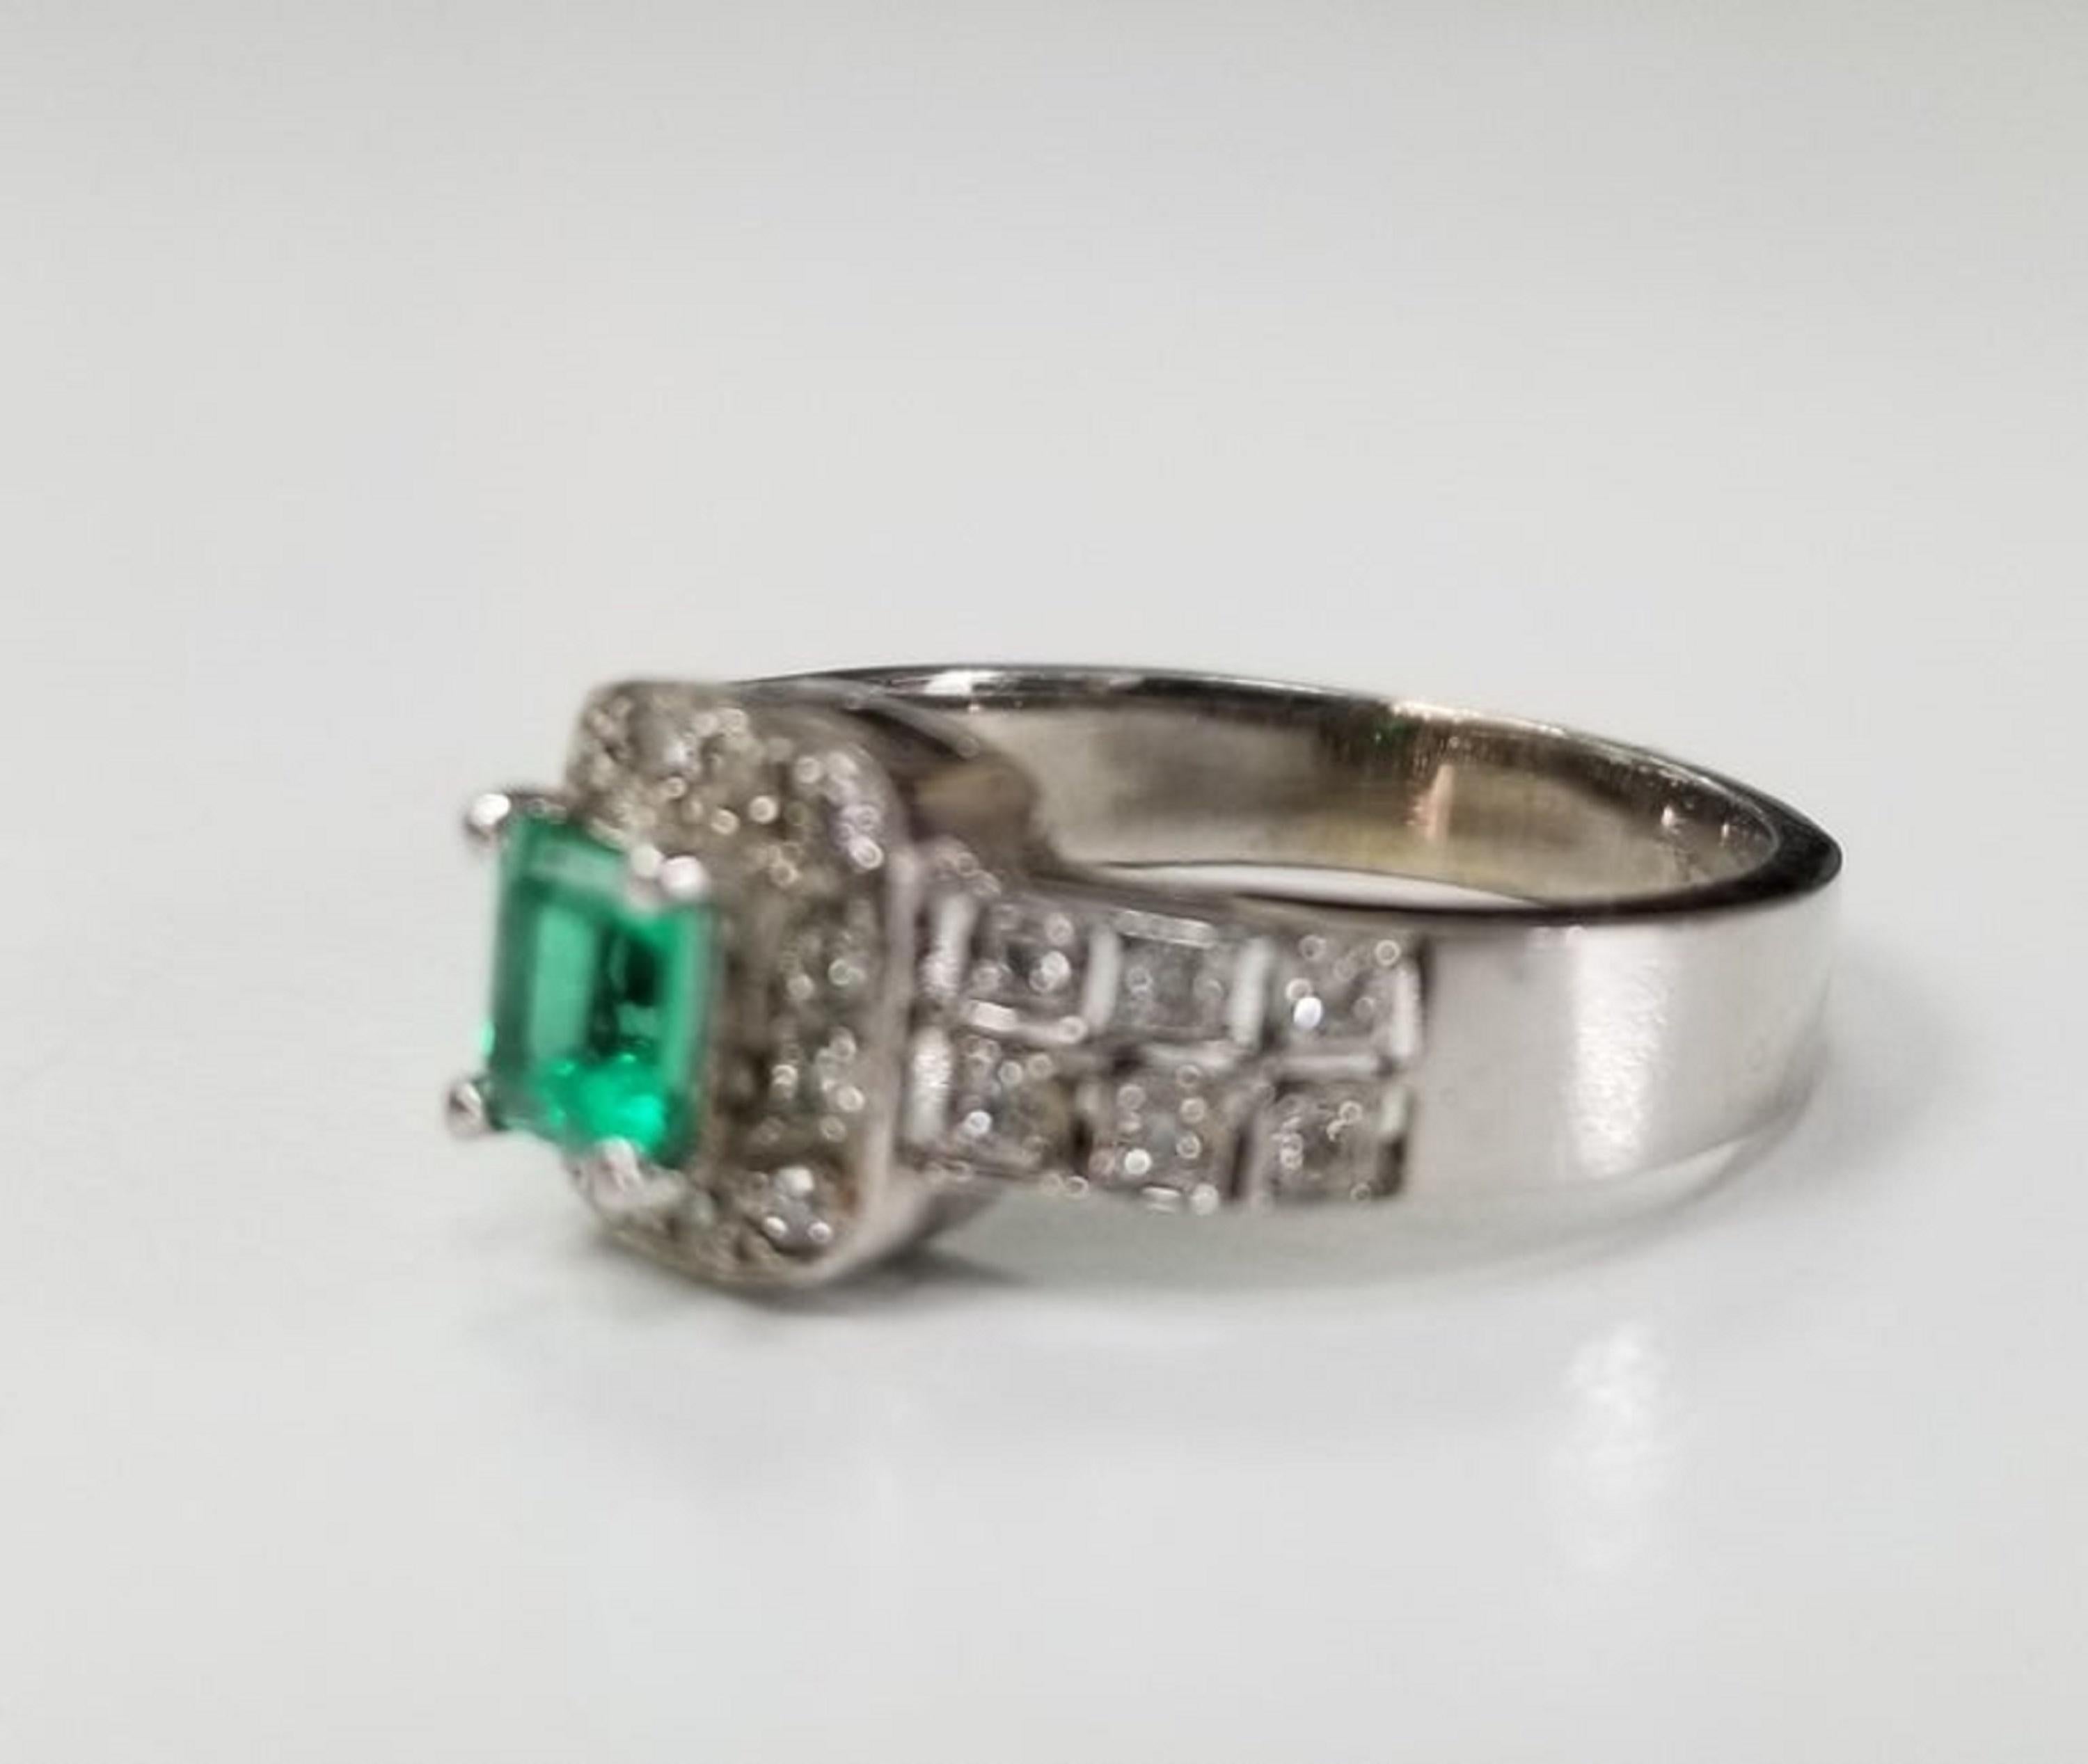 14k white gold emerald and diamond ring, containing 1 emerald cut emerald weighing .38cts. and 26 round full cut diamonds of very fine quality weighing .30pts.